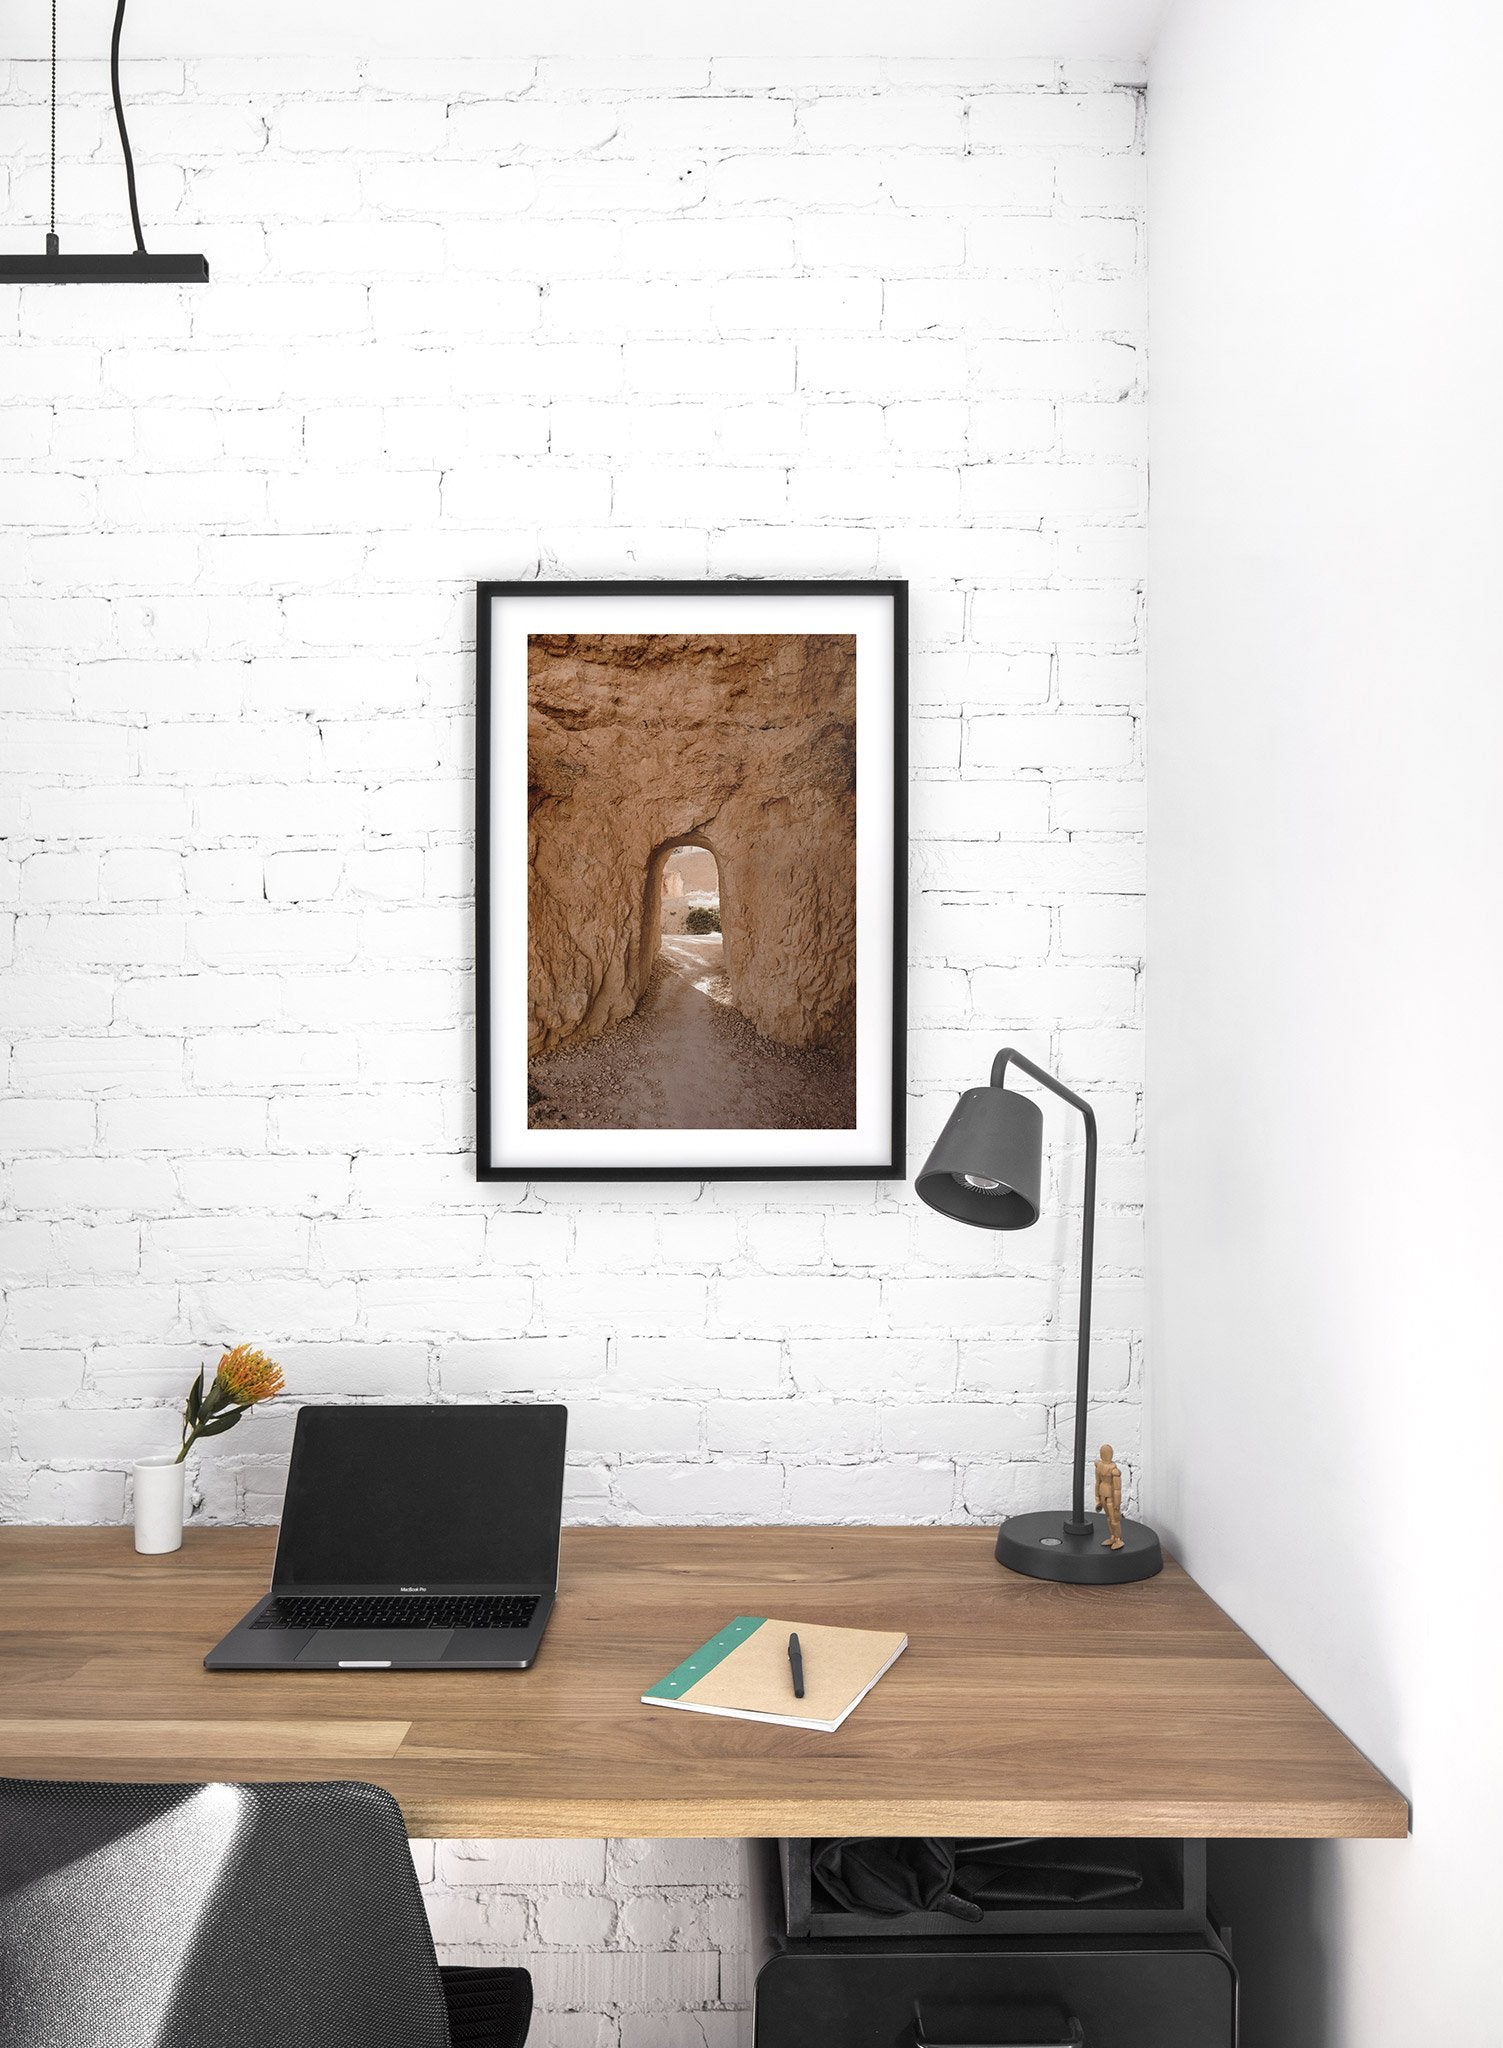 Modern photography poster by Opposite Wall with little doorway carved in stone - Lifestyle - Office Desk